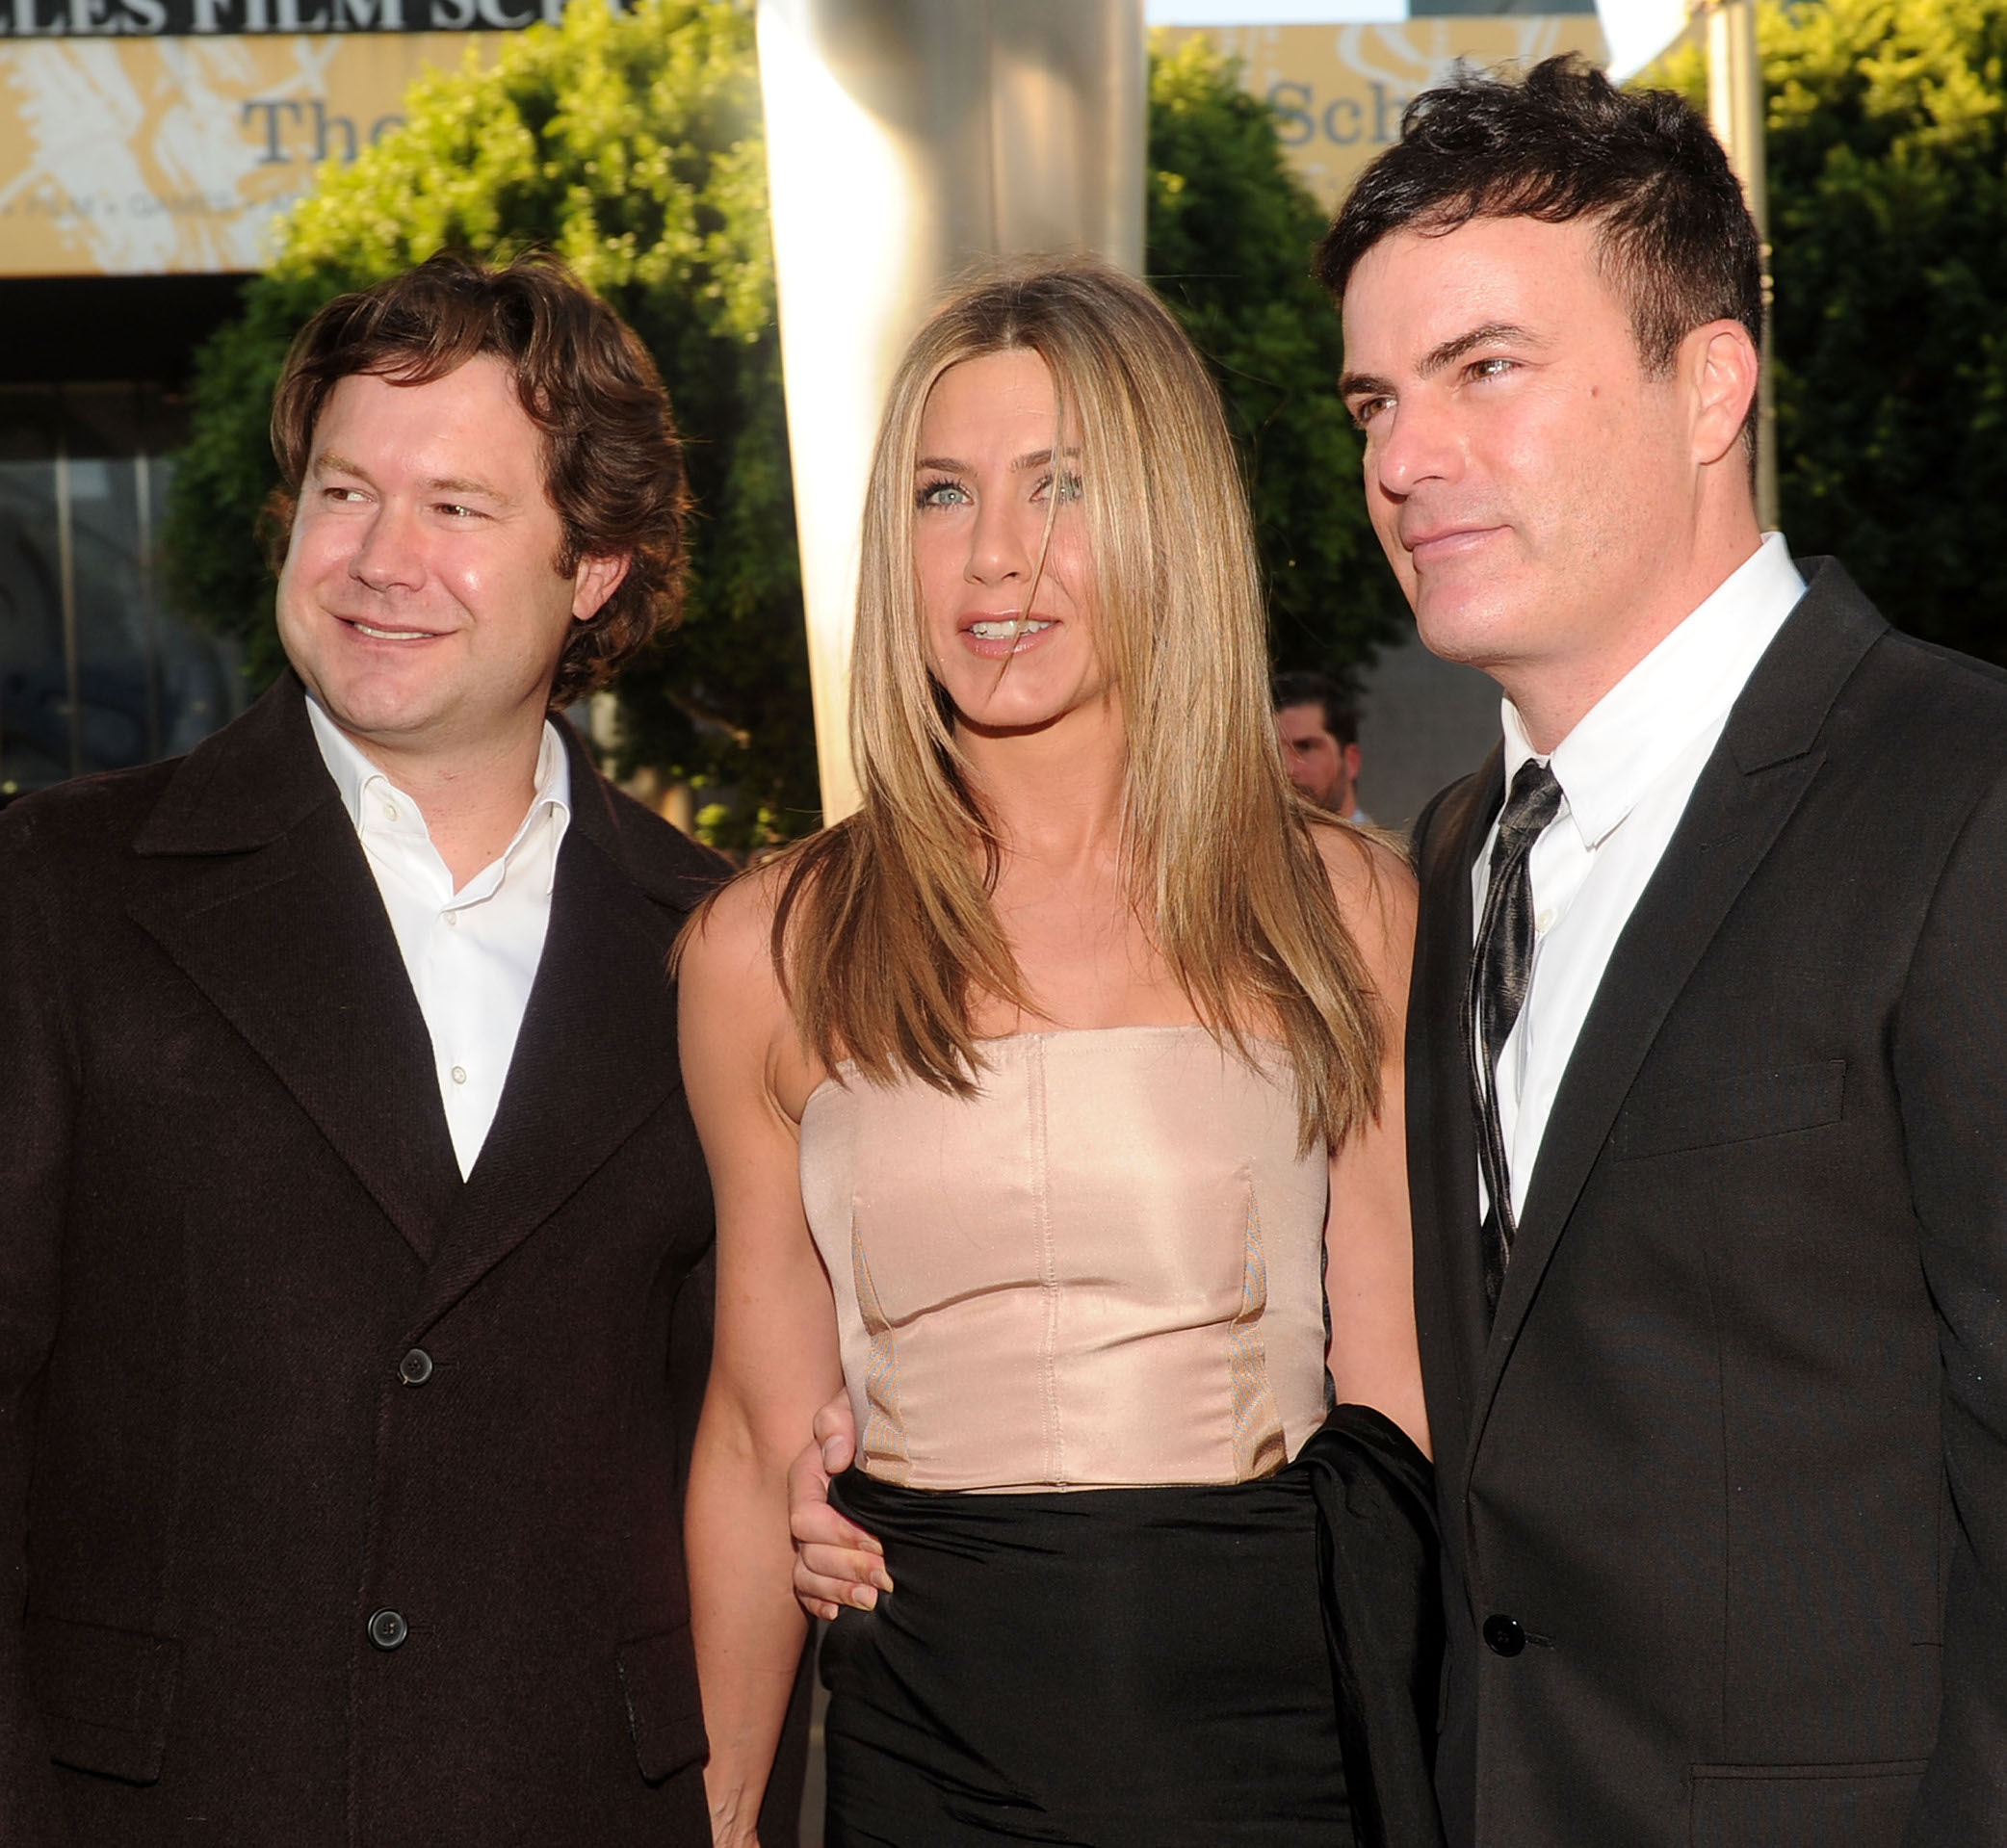 LOS ANGELES, CA - AUGUST 16:  (L-R) Director Josh Gordon, actress/producer Jennifer Aniston, and director Will Speck arrive at the premiere of Miramax's 